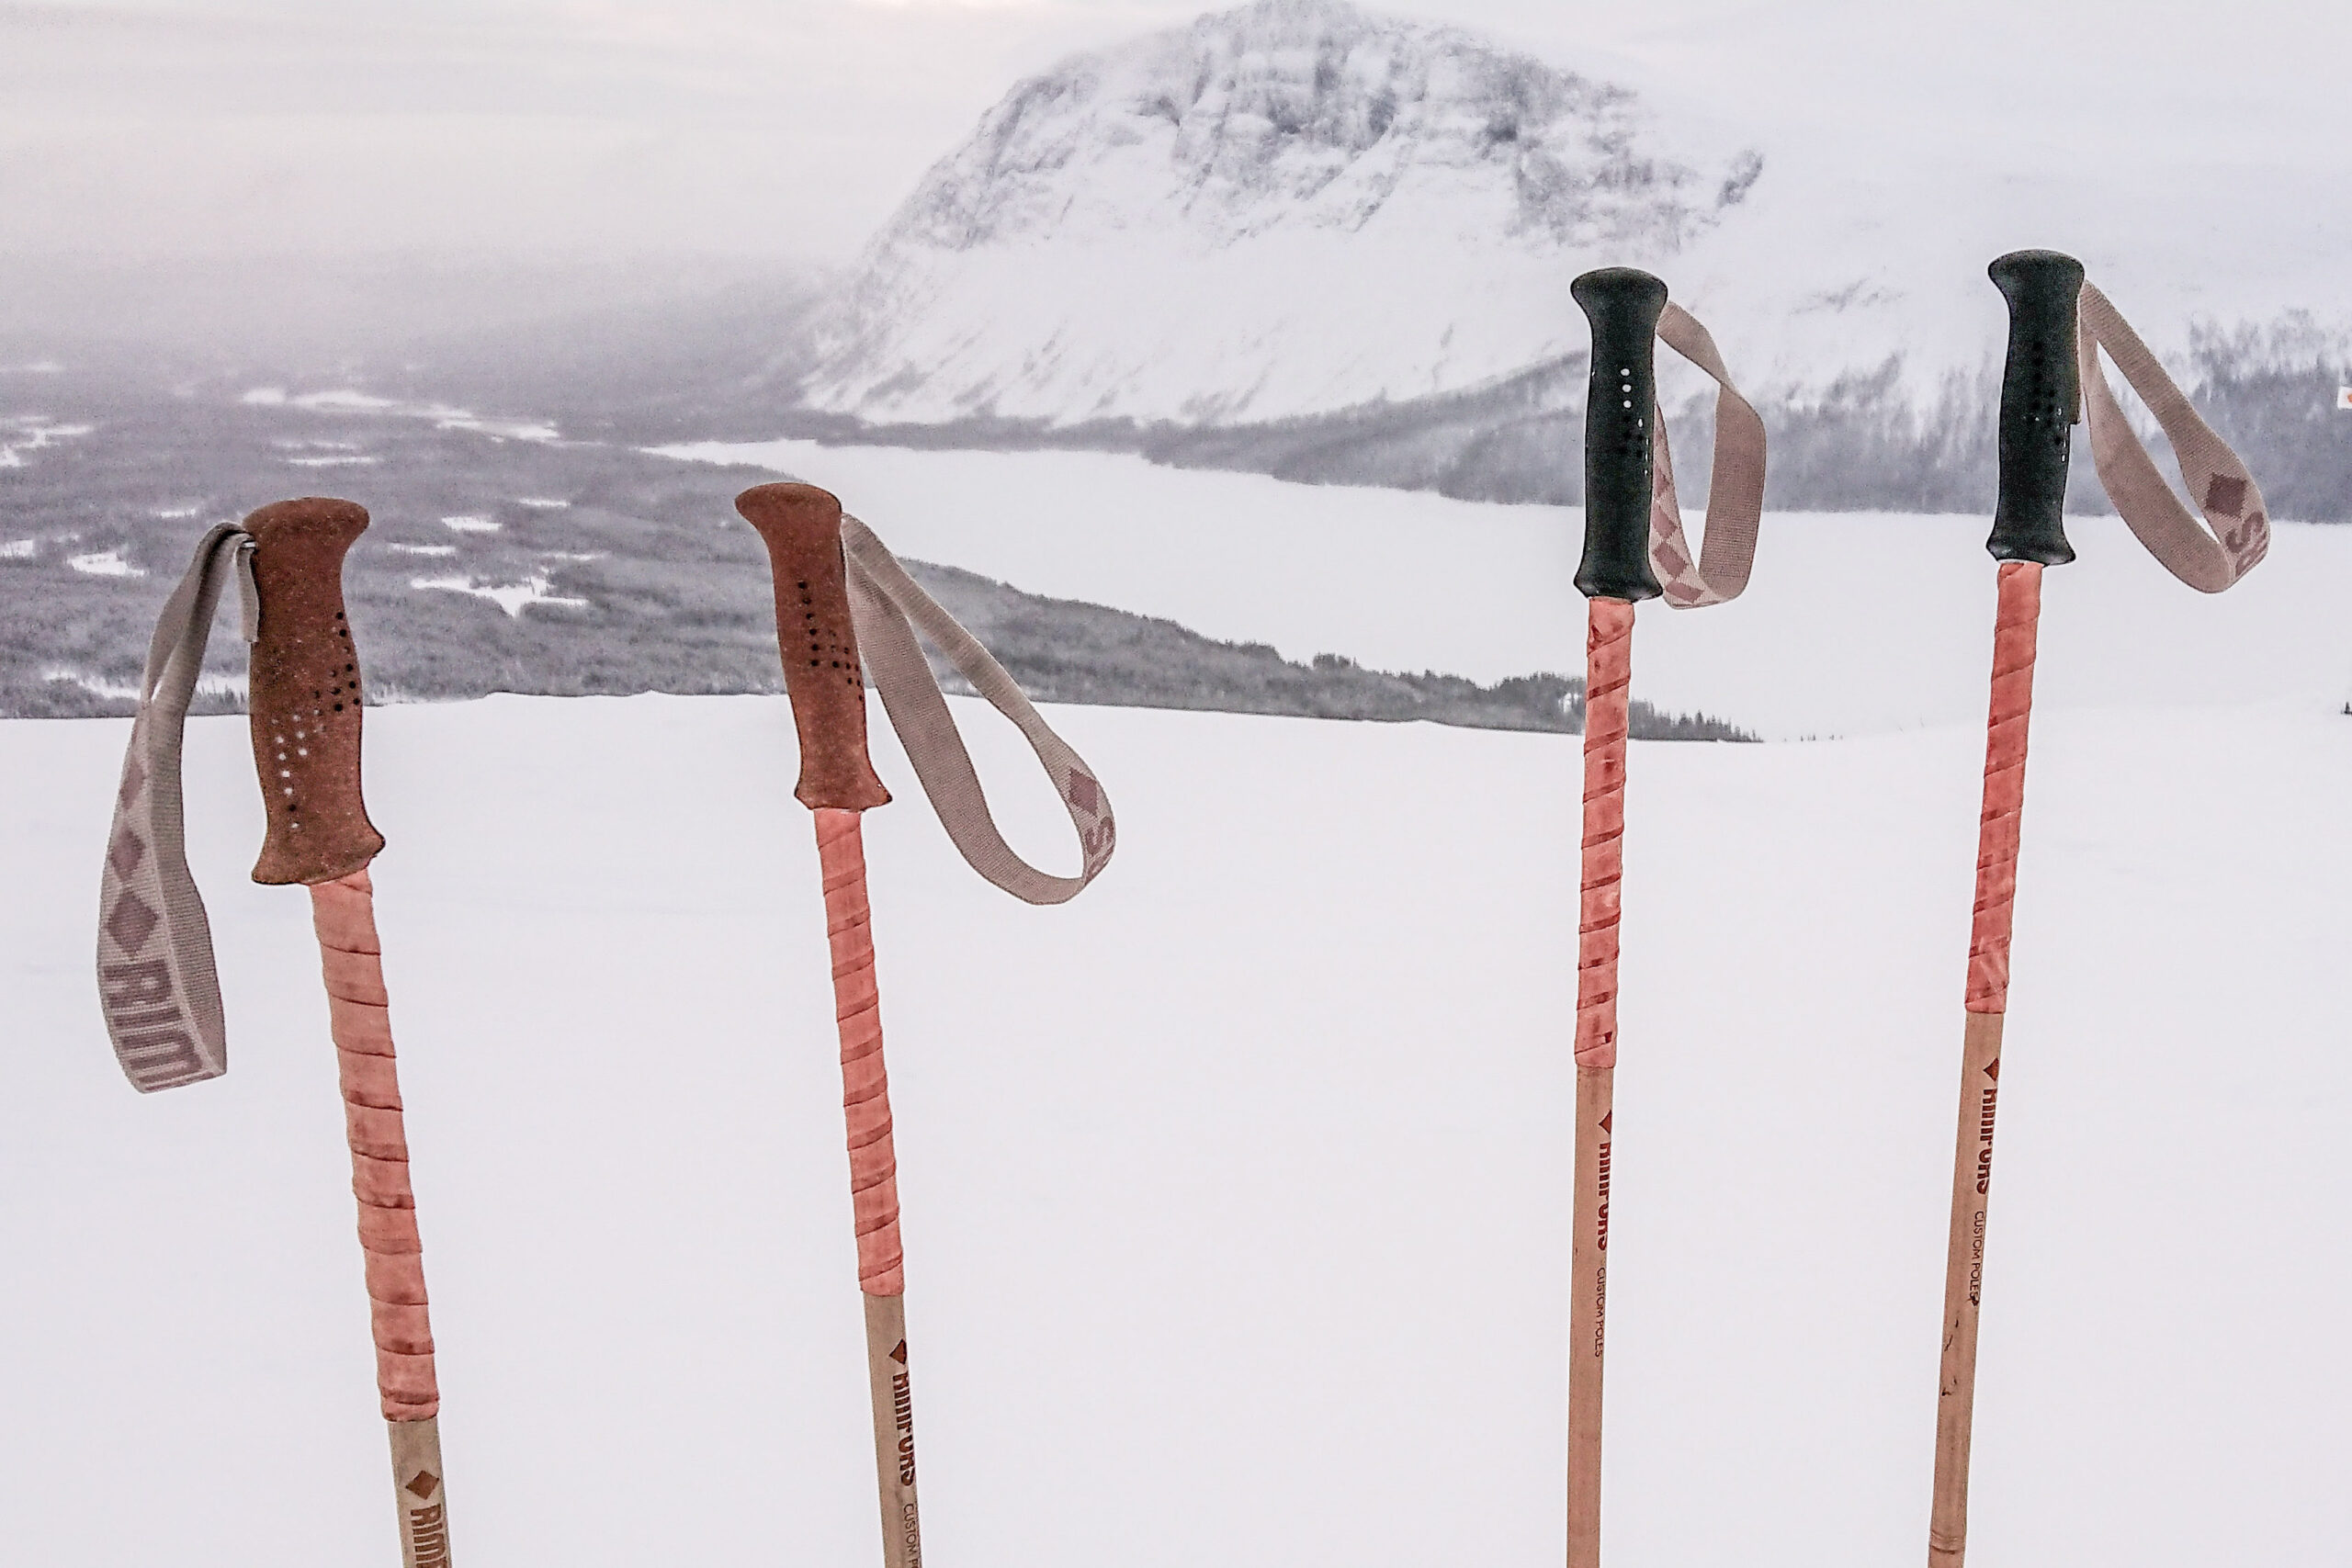 Bamboo ski poles with extended grip from wound bark tanned reindeer hide.